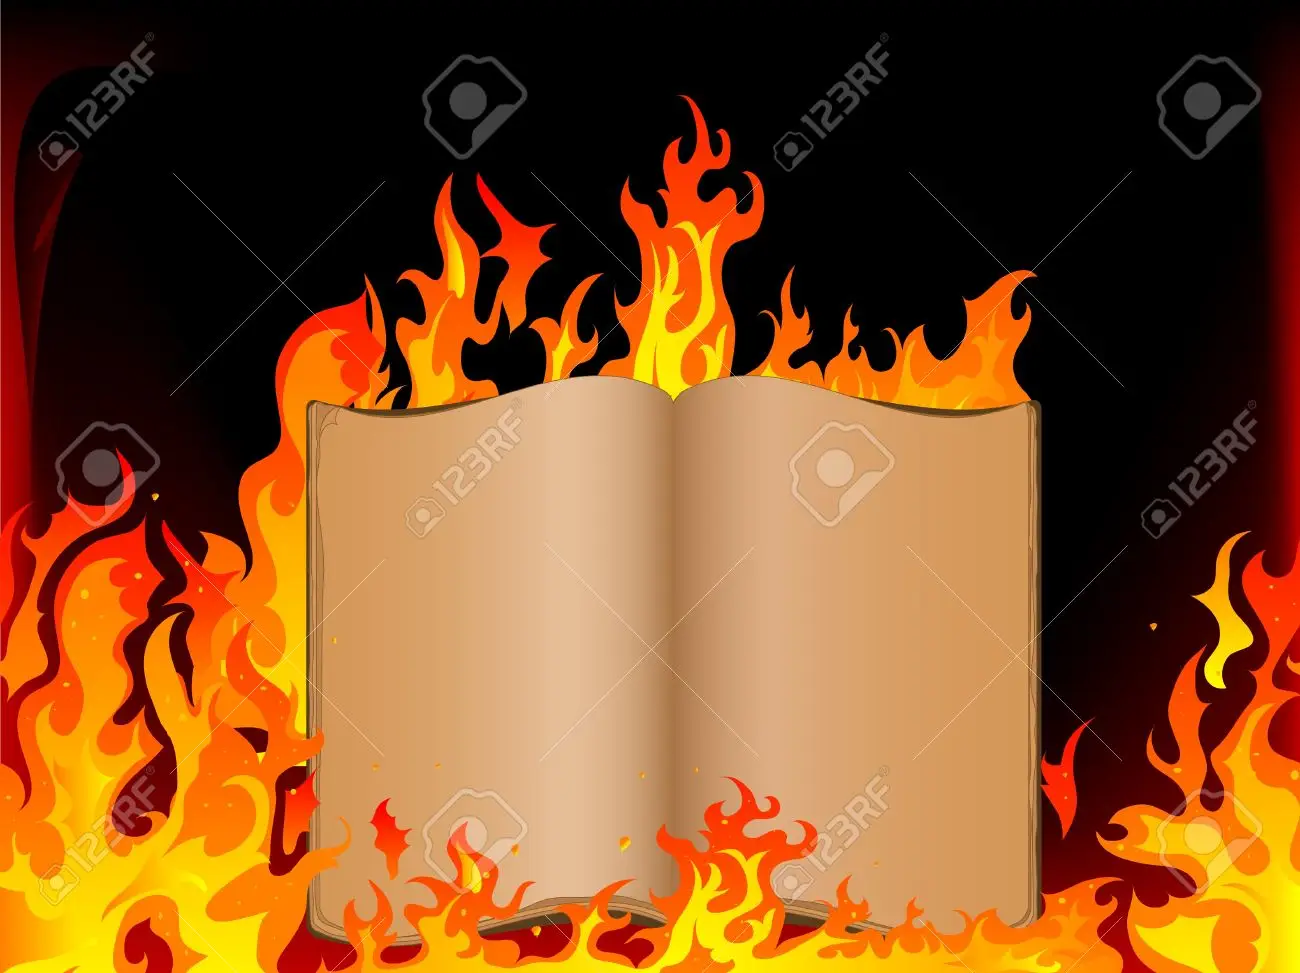 Old open book in fire